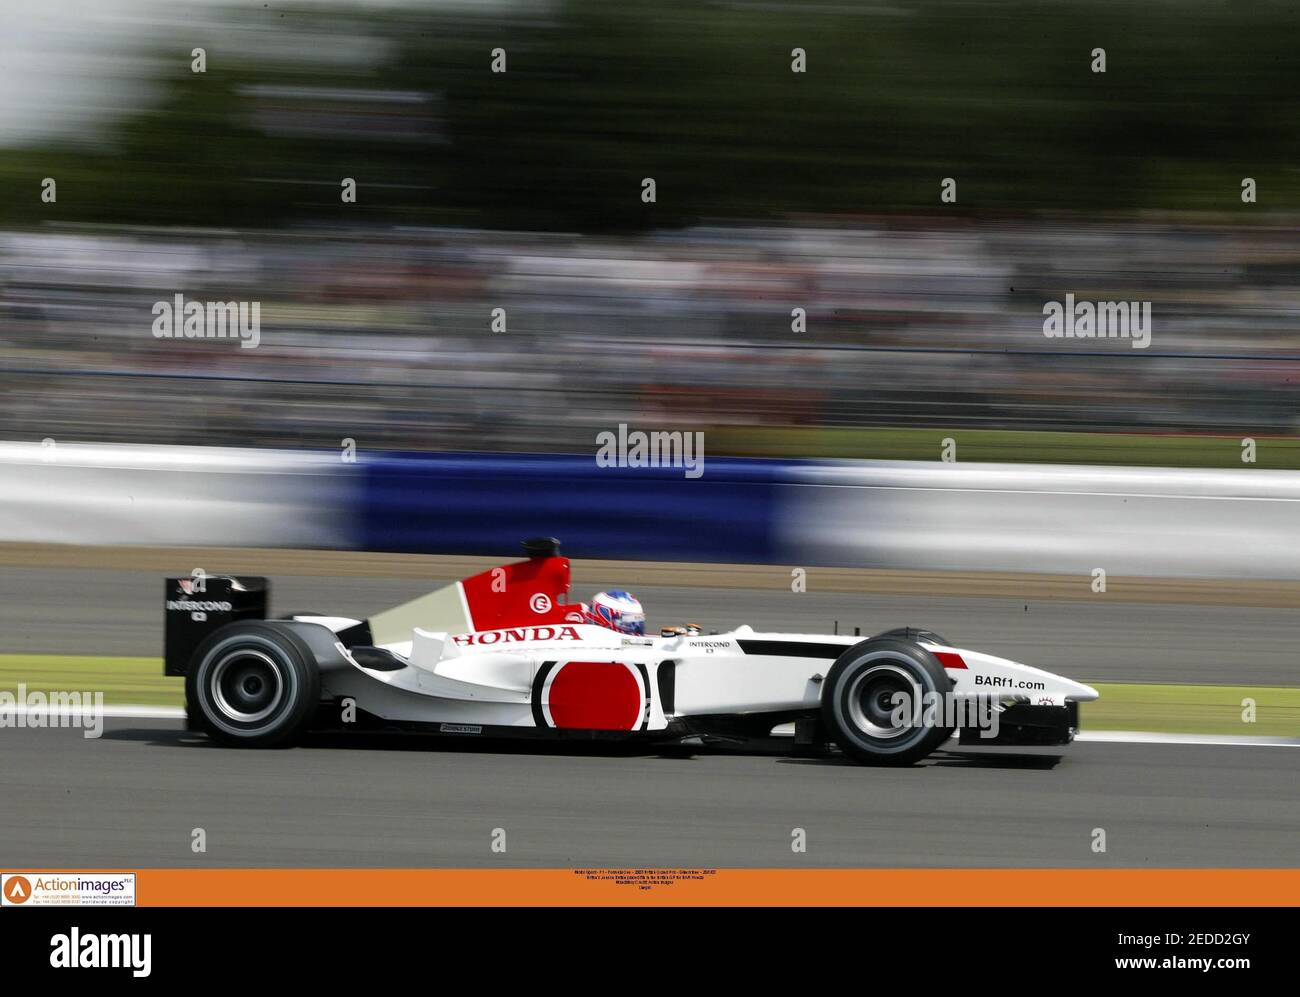 Motor Sport - F1 - Formula One - 2003 British Grand Prix - Silverstone - 20/7/03  Briton's Jenson Button placed 8th in the British GP for BAR Honda  Mandatory Credit: Action Images  Livepic Stock Photo